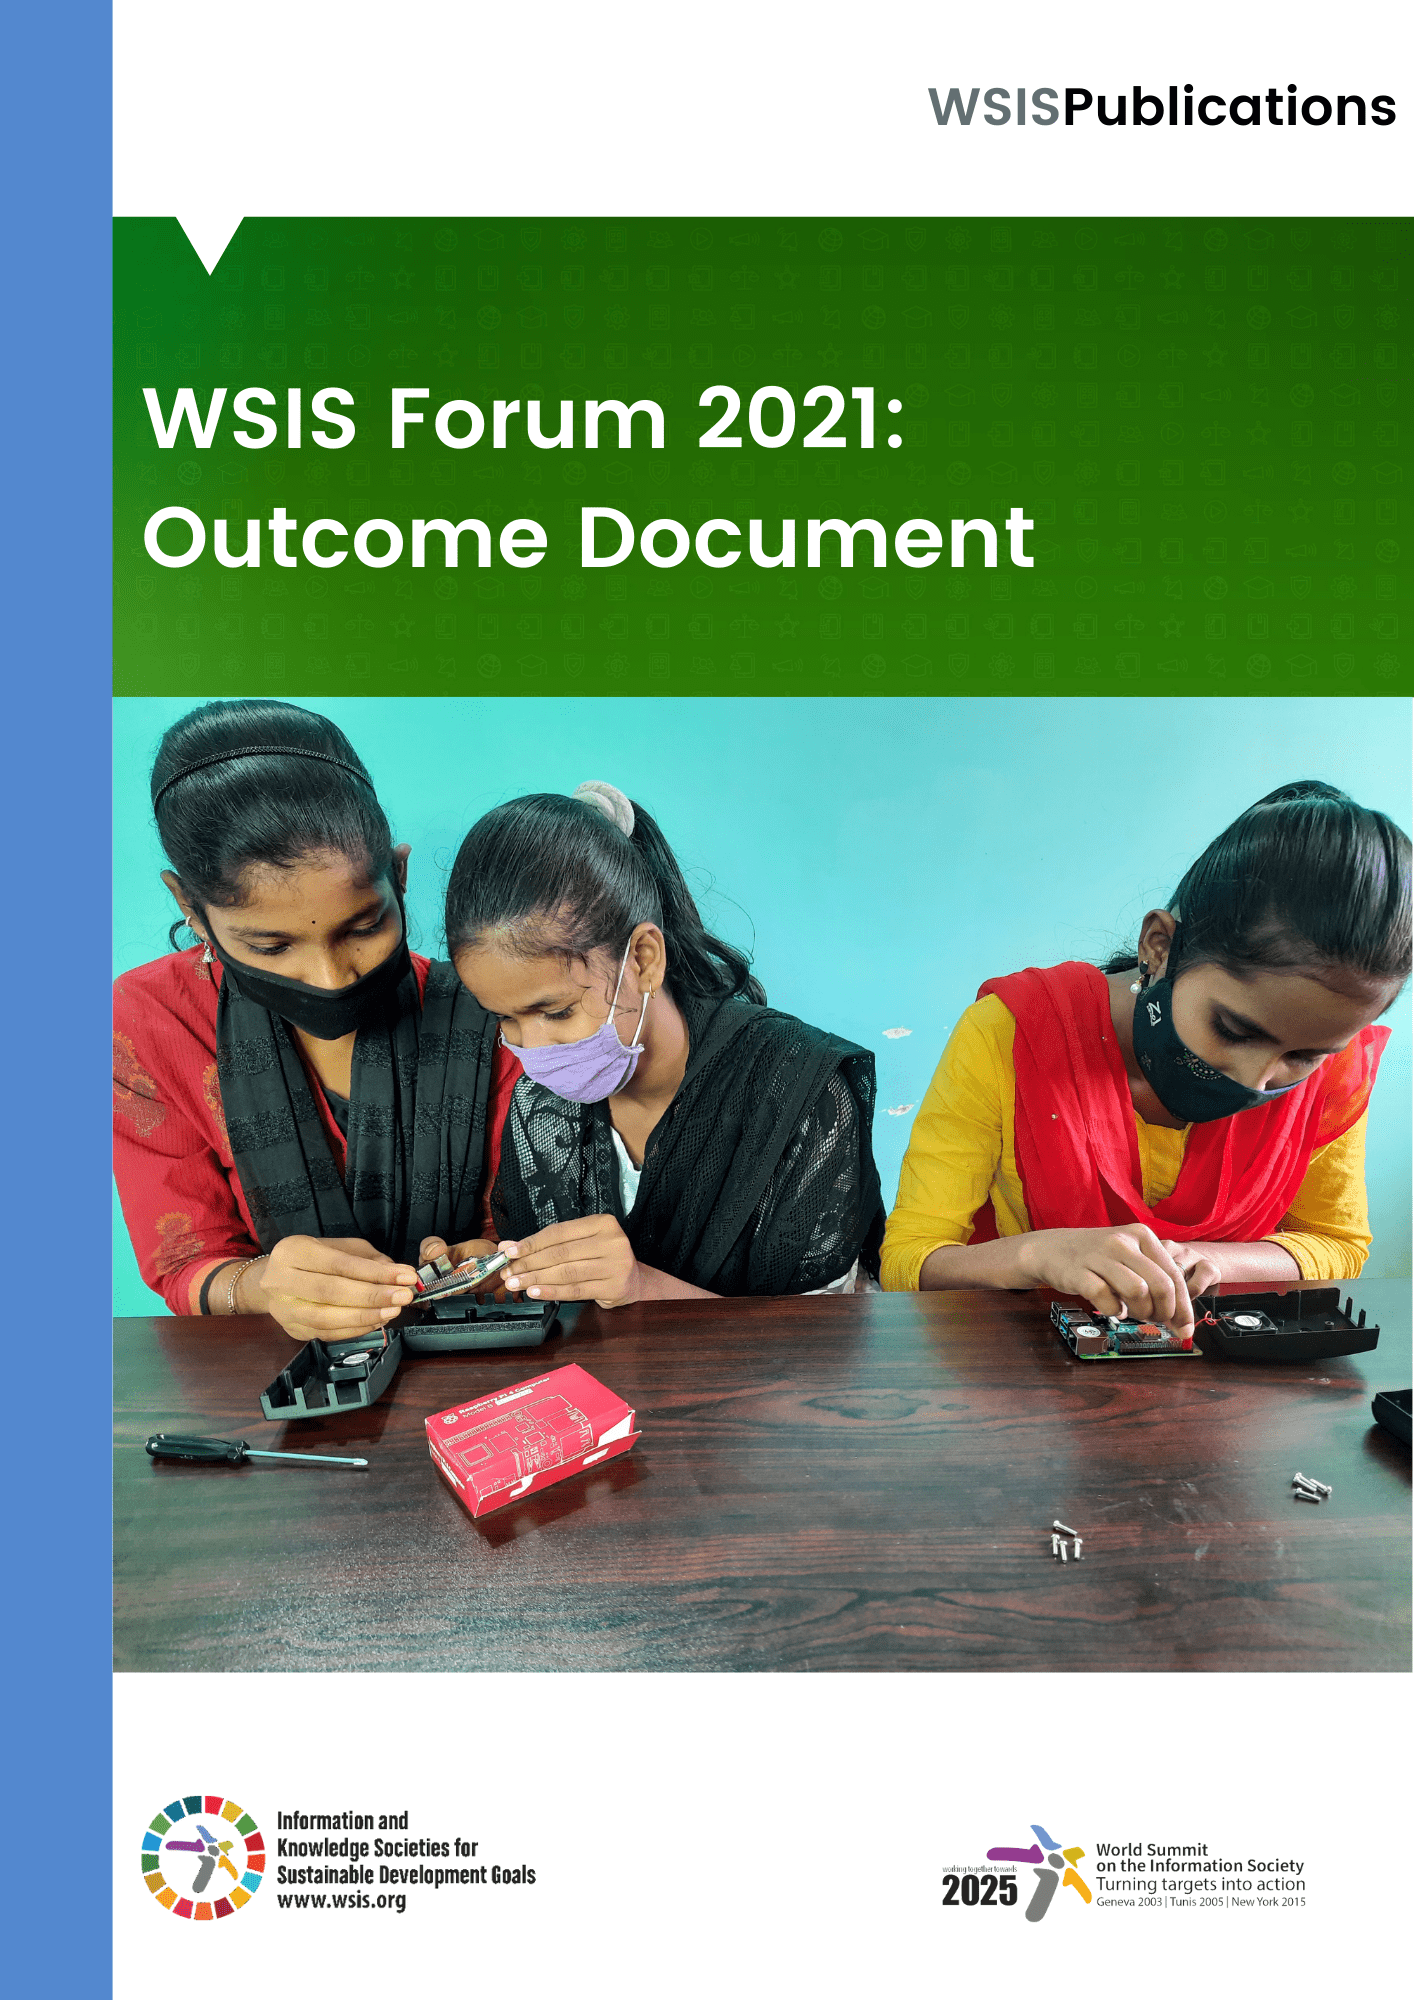 WSIS Forum 2021: Outcome Document